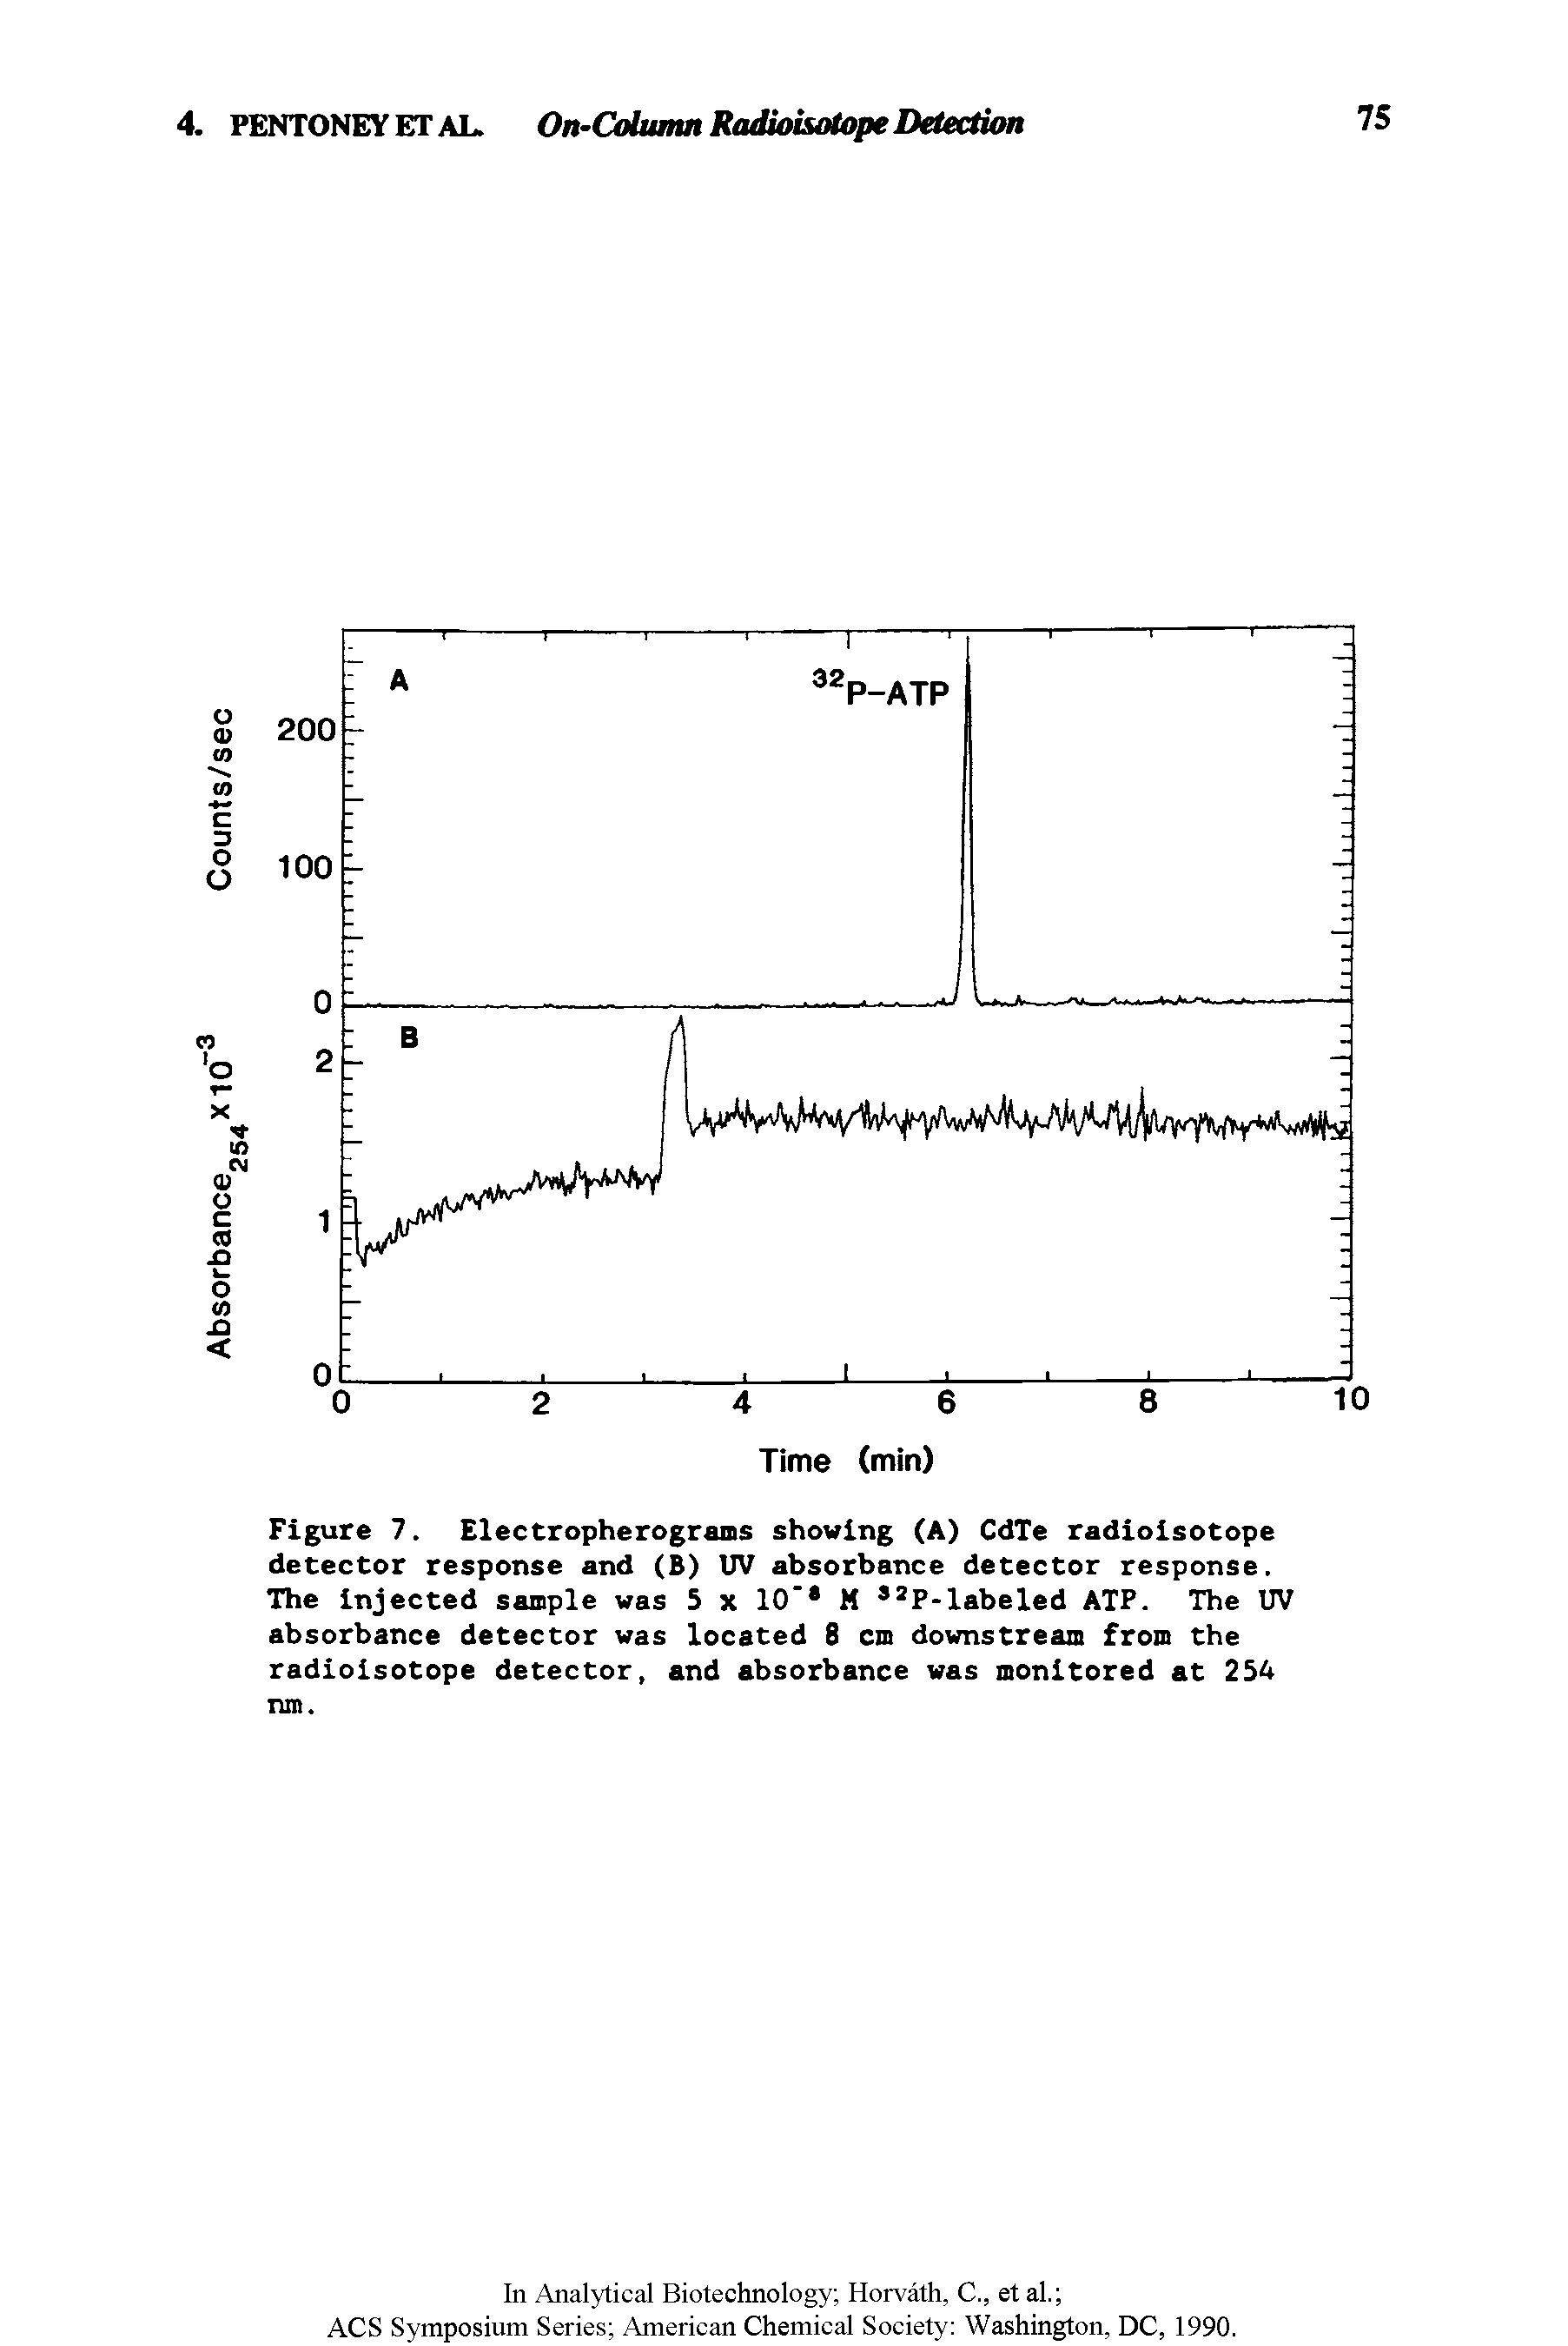 Figure 7. Electropherograms showing (A) CdTe radioisotope detector response and (B) UV absorbance detector response. The injected sample was 5 x 10" M 2P-labeled ATP. The UV absorbance detector was located 8 cm downstream from the radioisotope detector, and absorbance was monitored at 254 run.